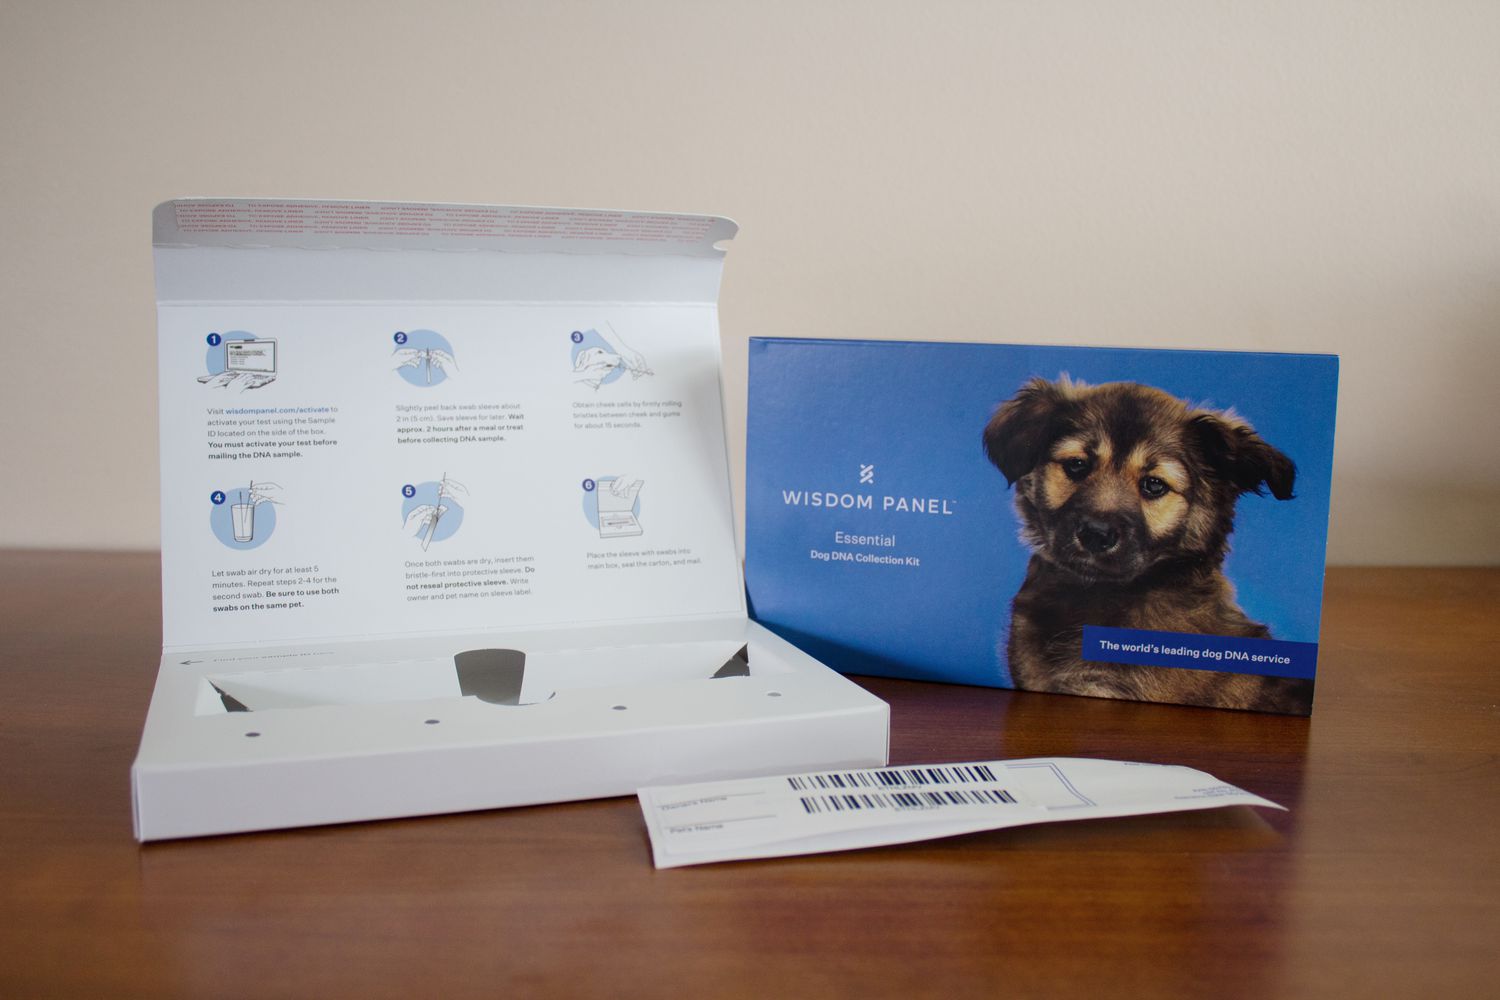 Instructions for a Wisdom Panel Essential Dog DNA Collection Kit displayed on a wooden table